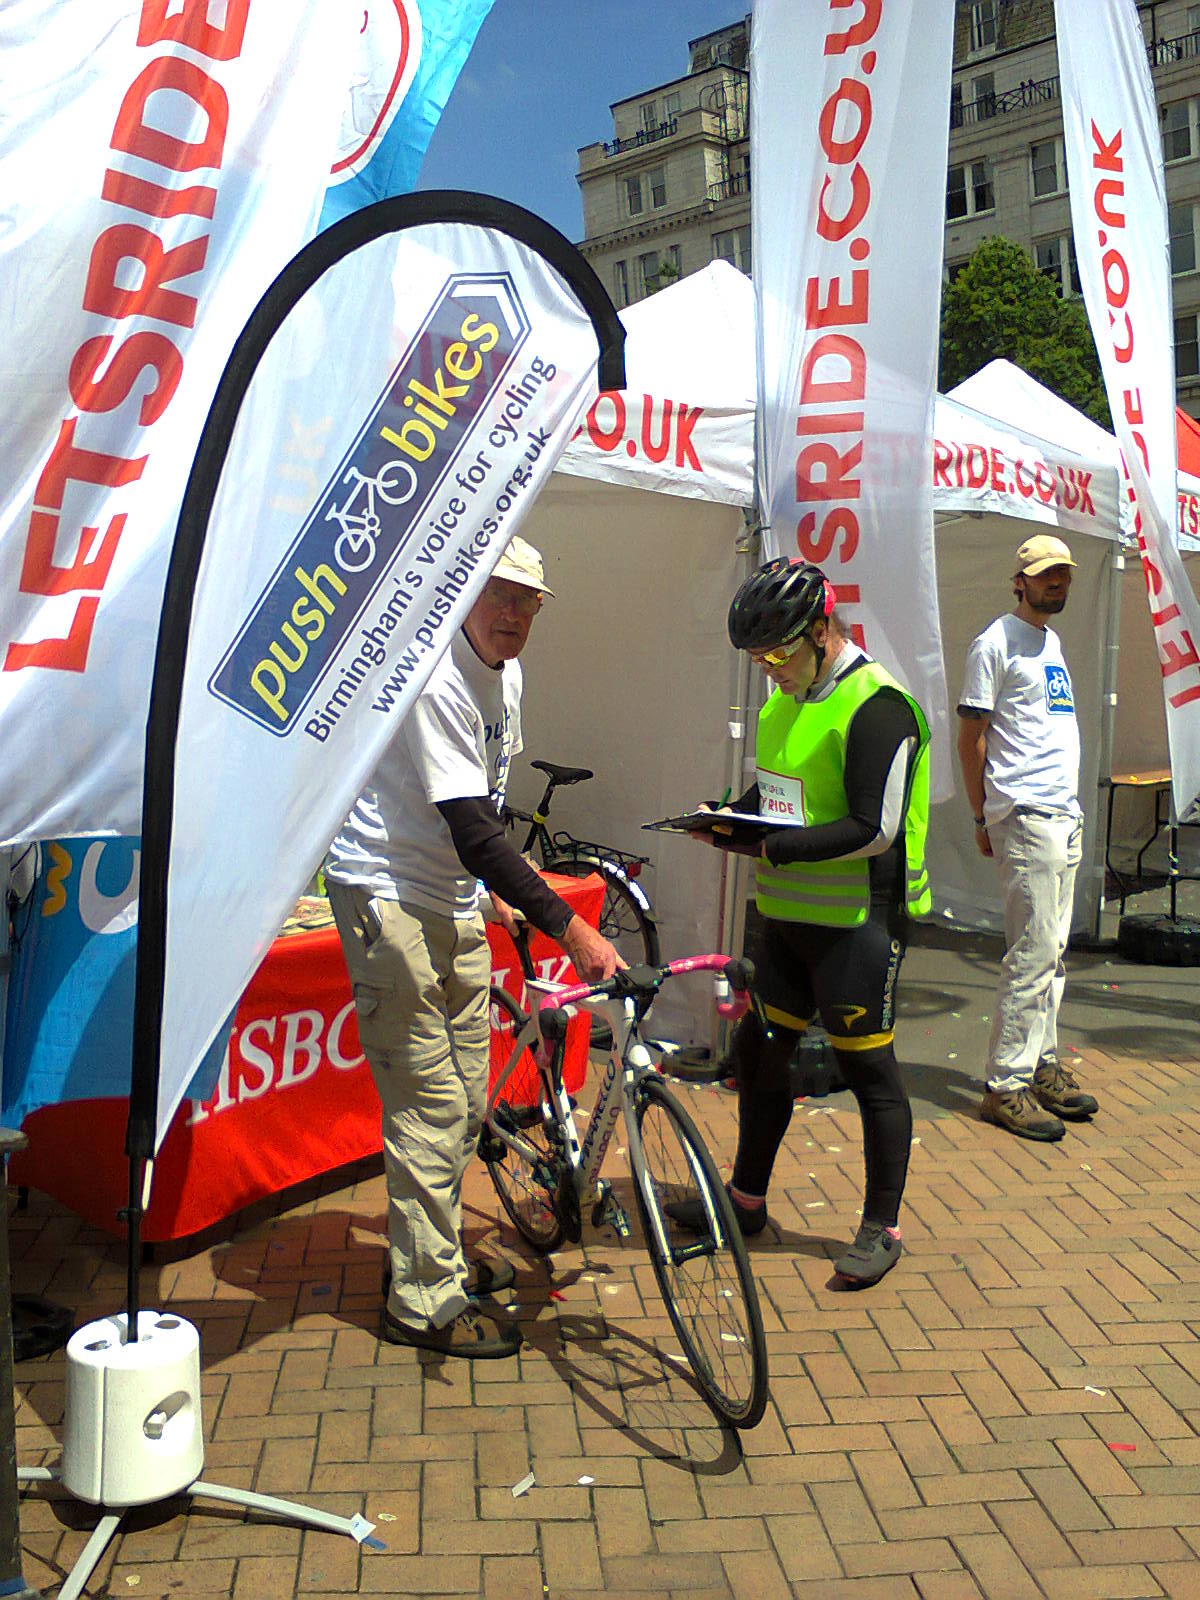 The Push Bikes stand at City Ride